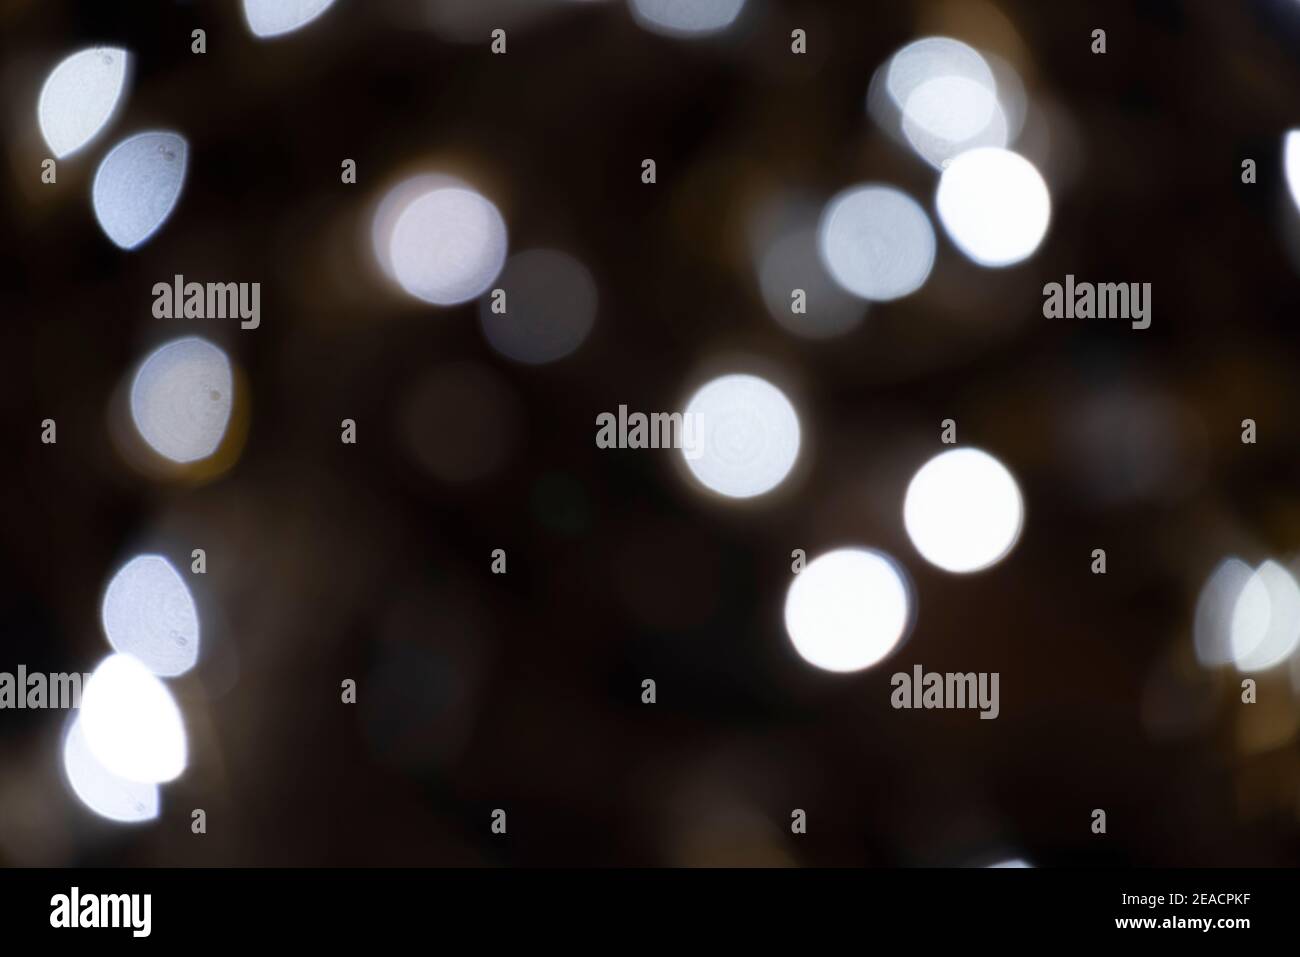 Abstract background with white lights. Stock Photo